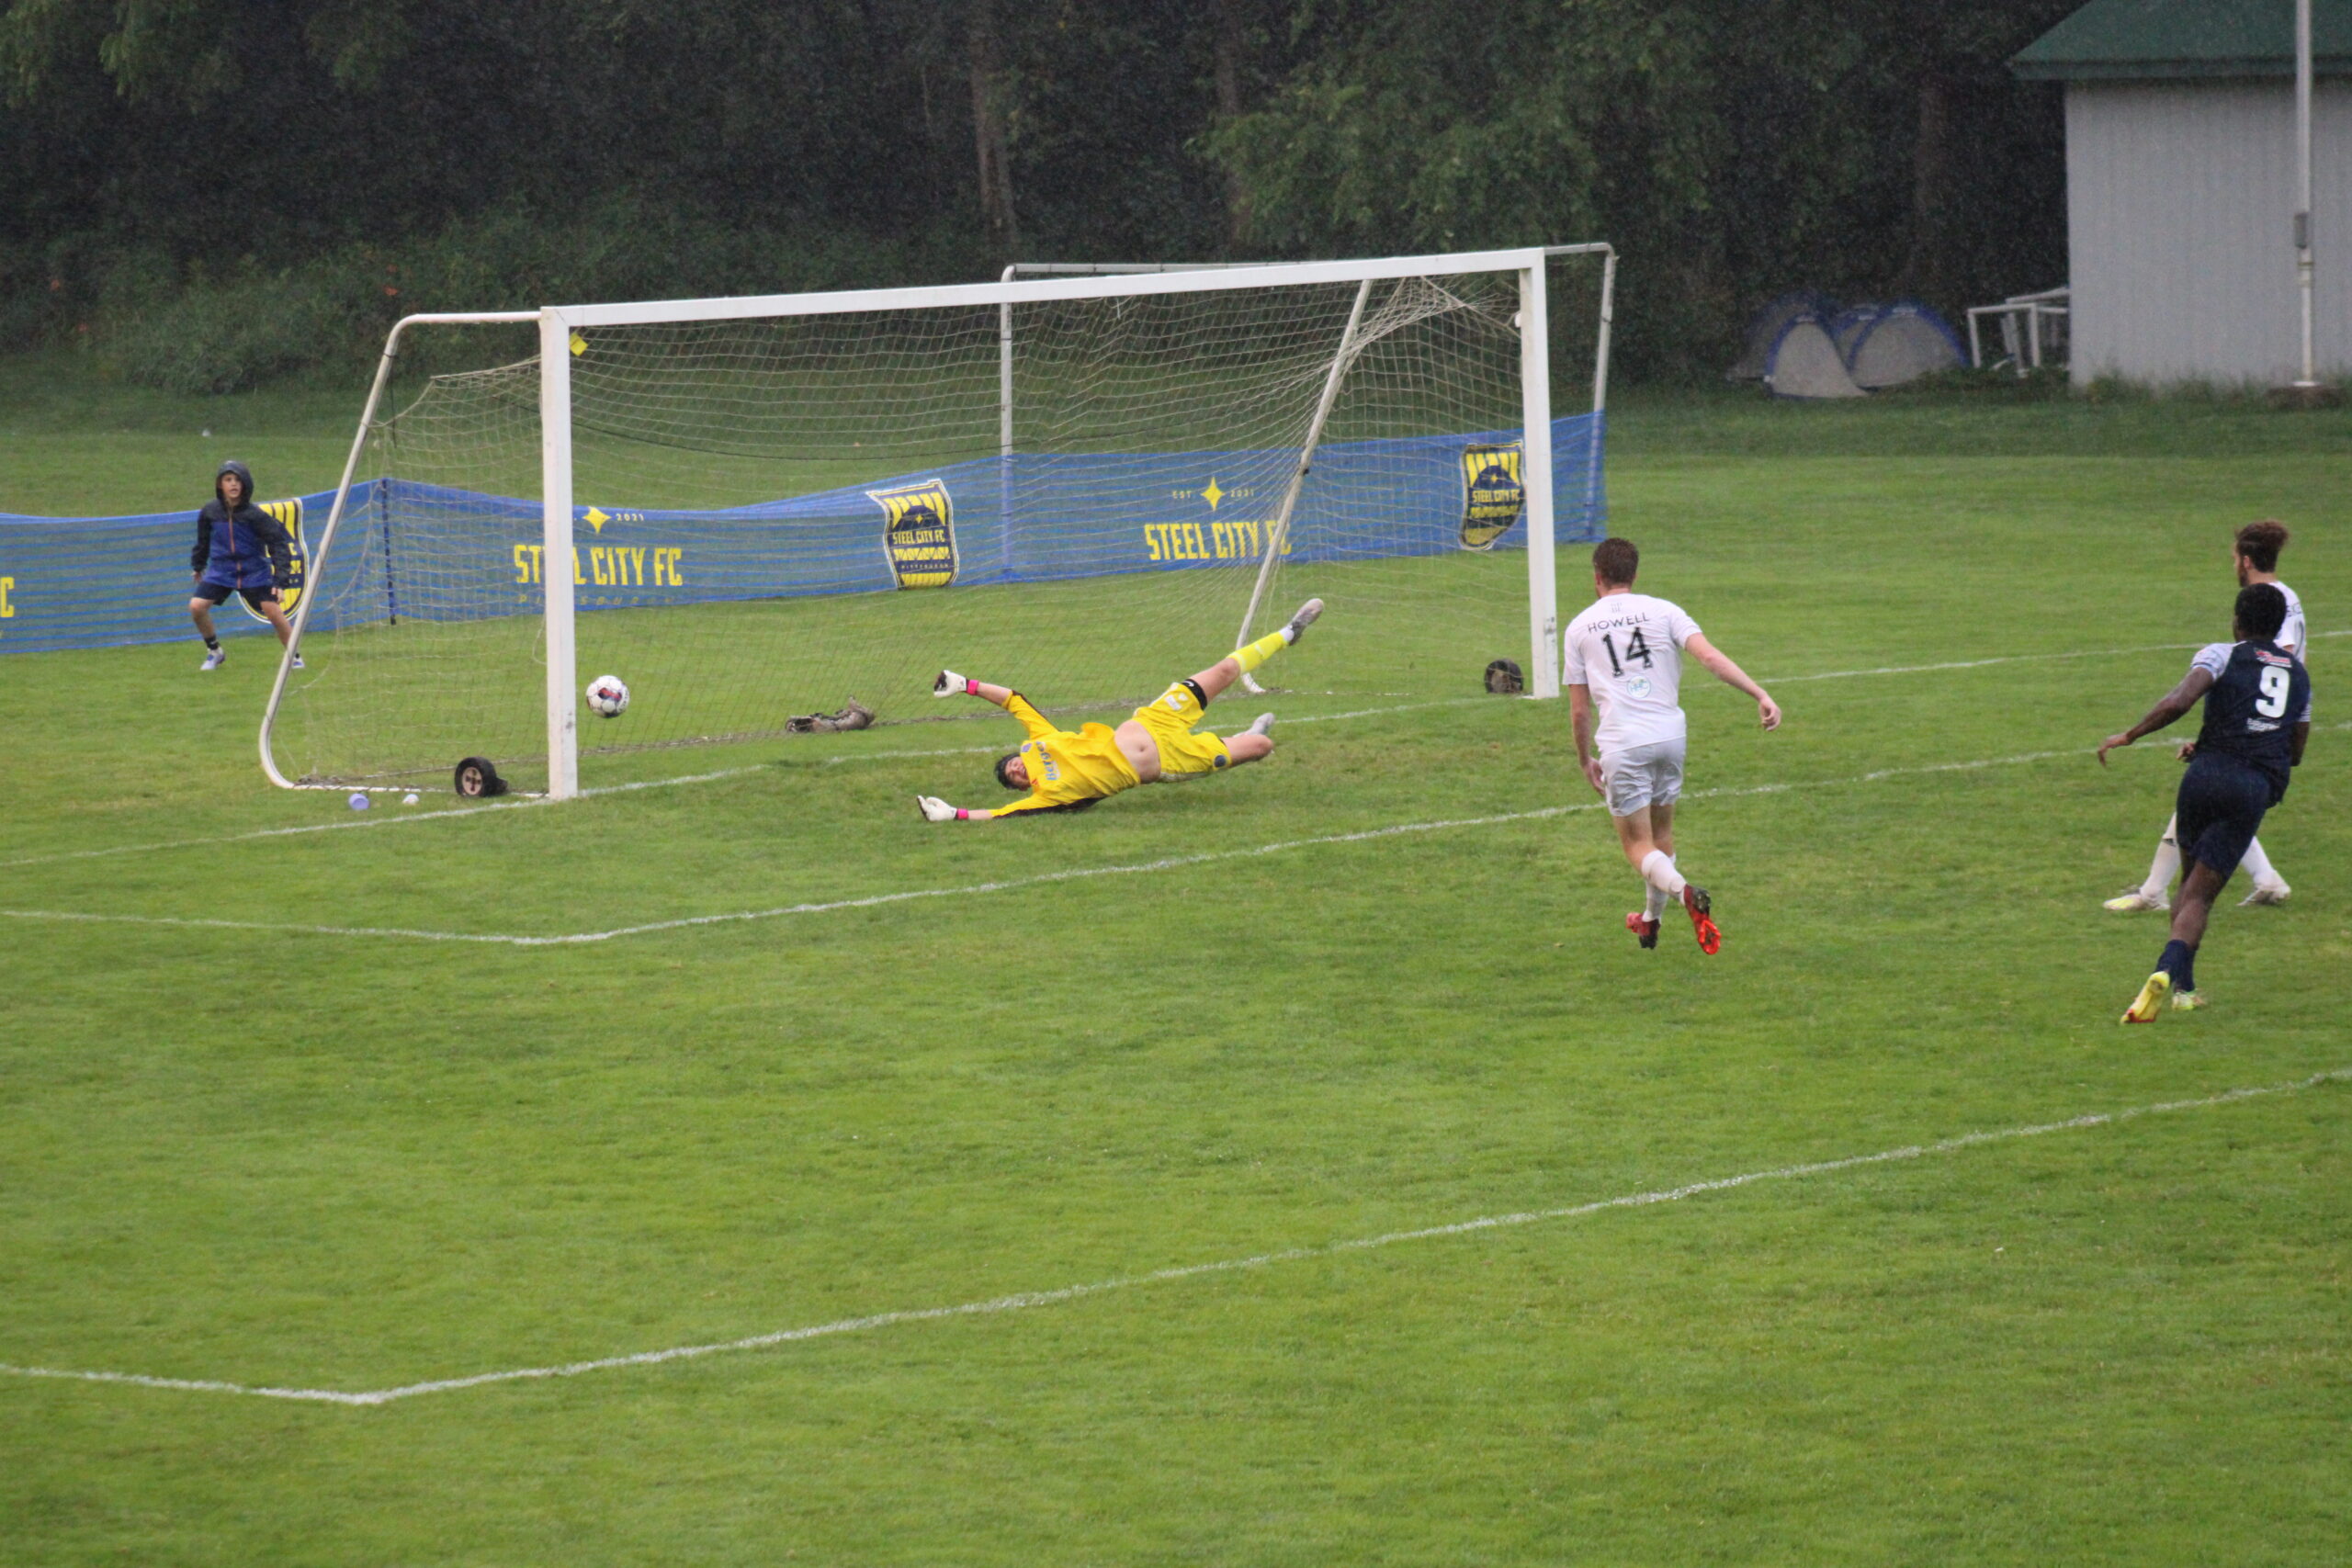 The ball is in the center-left of the frame, just inside the goal. Yellow kitted goalkeeper is horizontal across the goal. White kitted defender is in center of frame. Black kitted attacker is in right of field